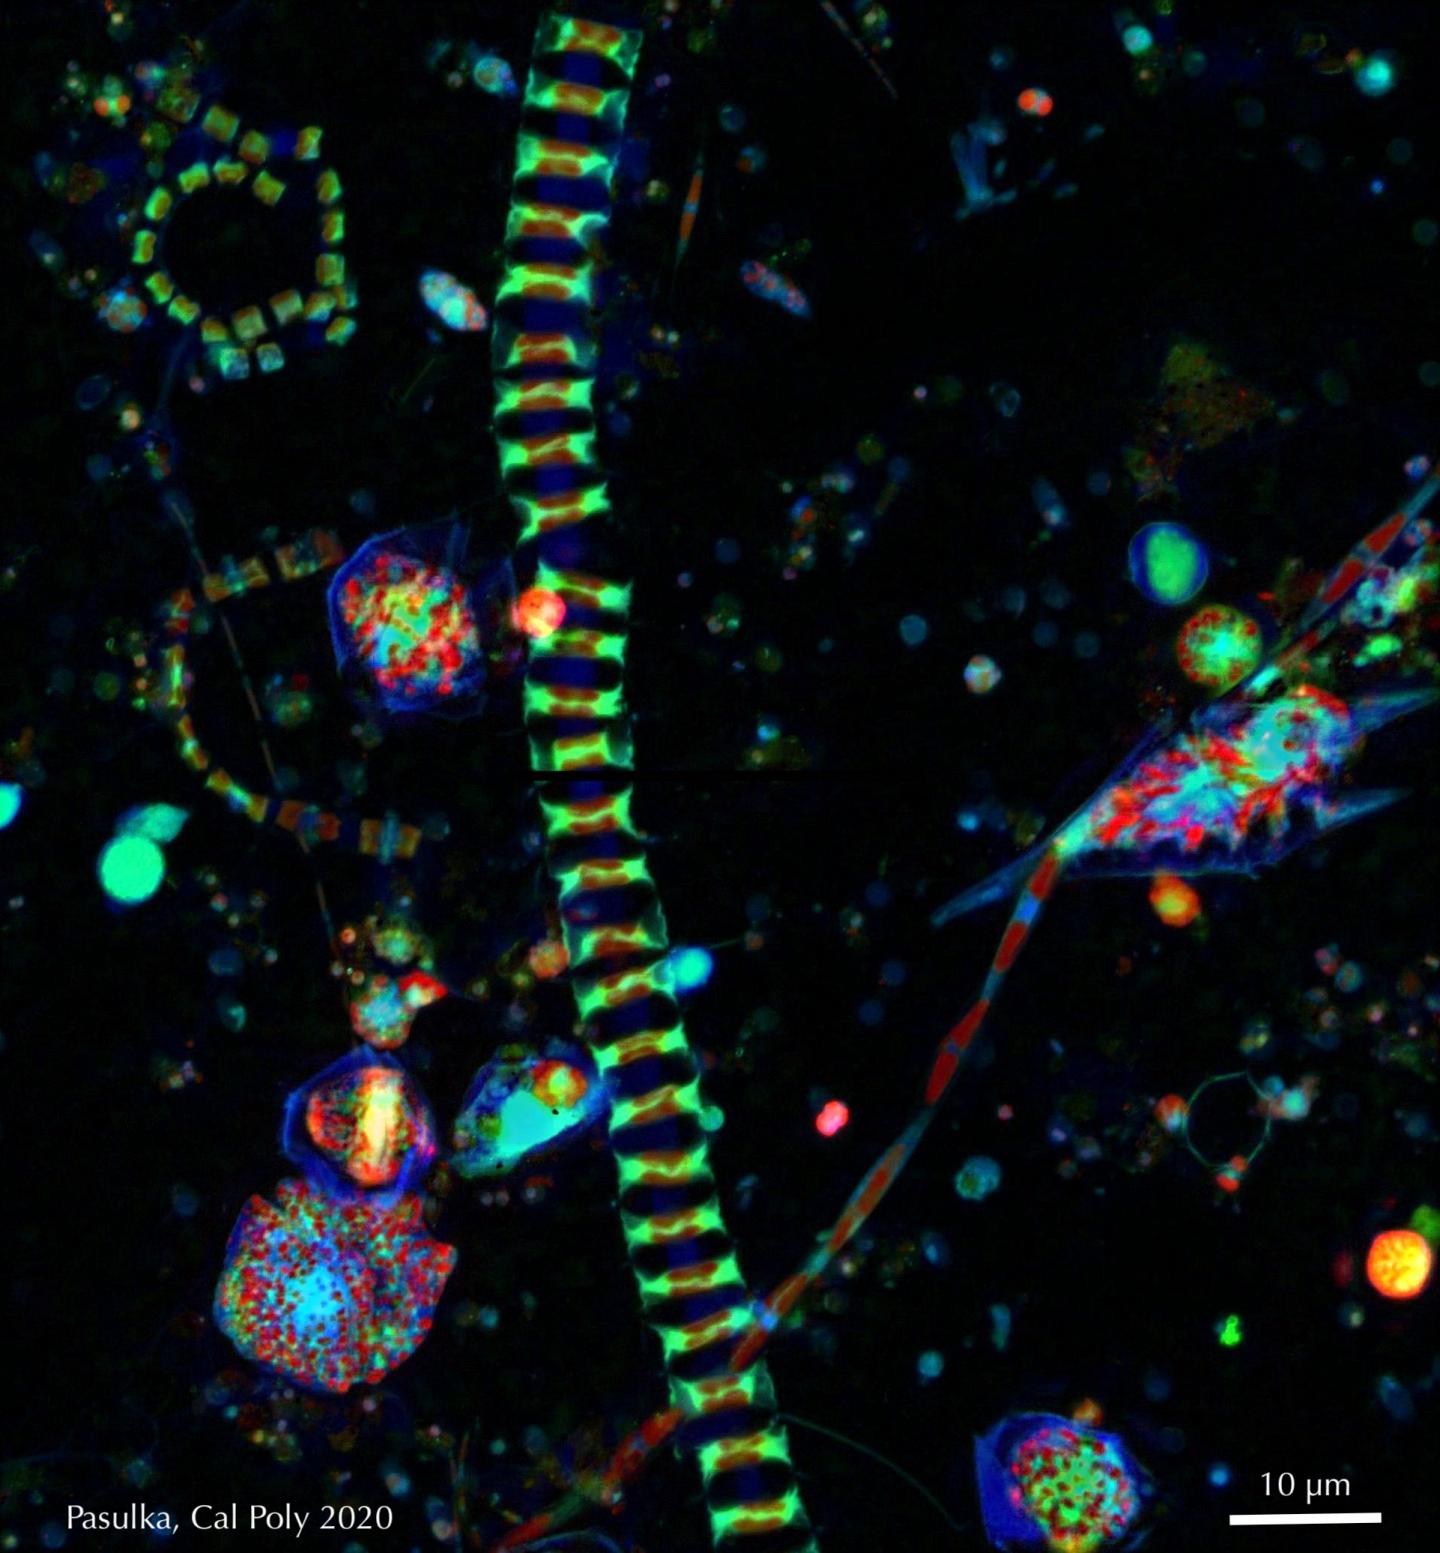 Fluorescence microscopy image of phytoplankton with chain-forming diatoms and large dinoflagellates